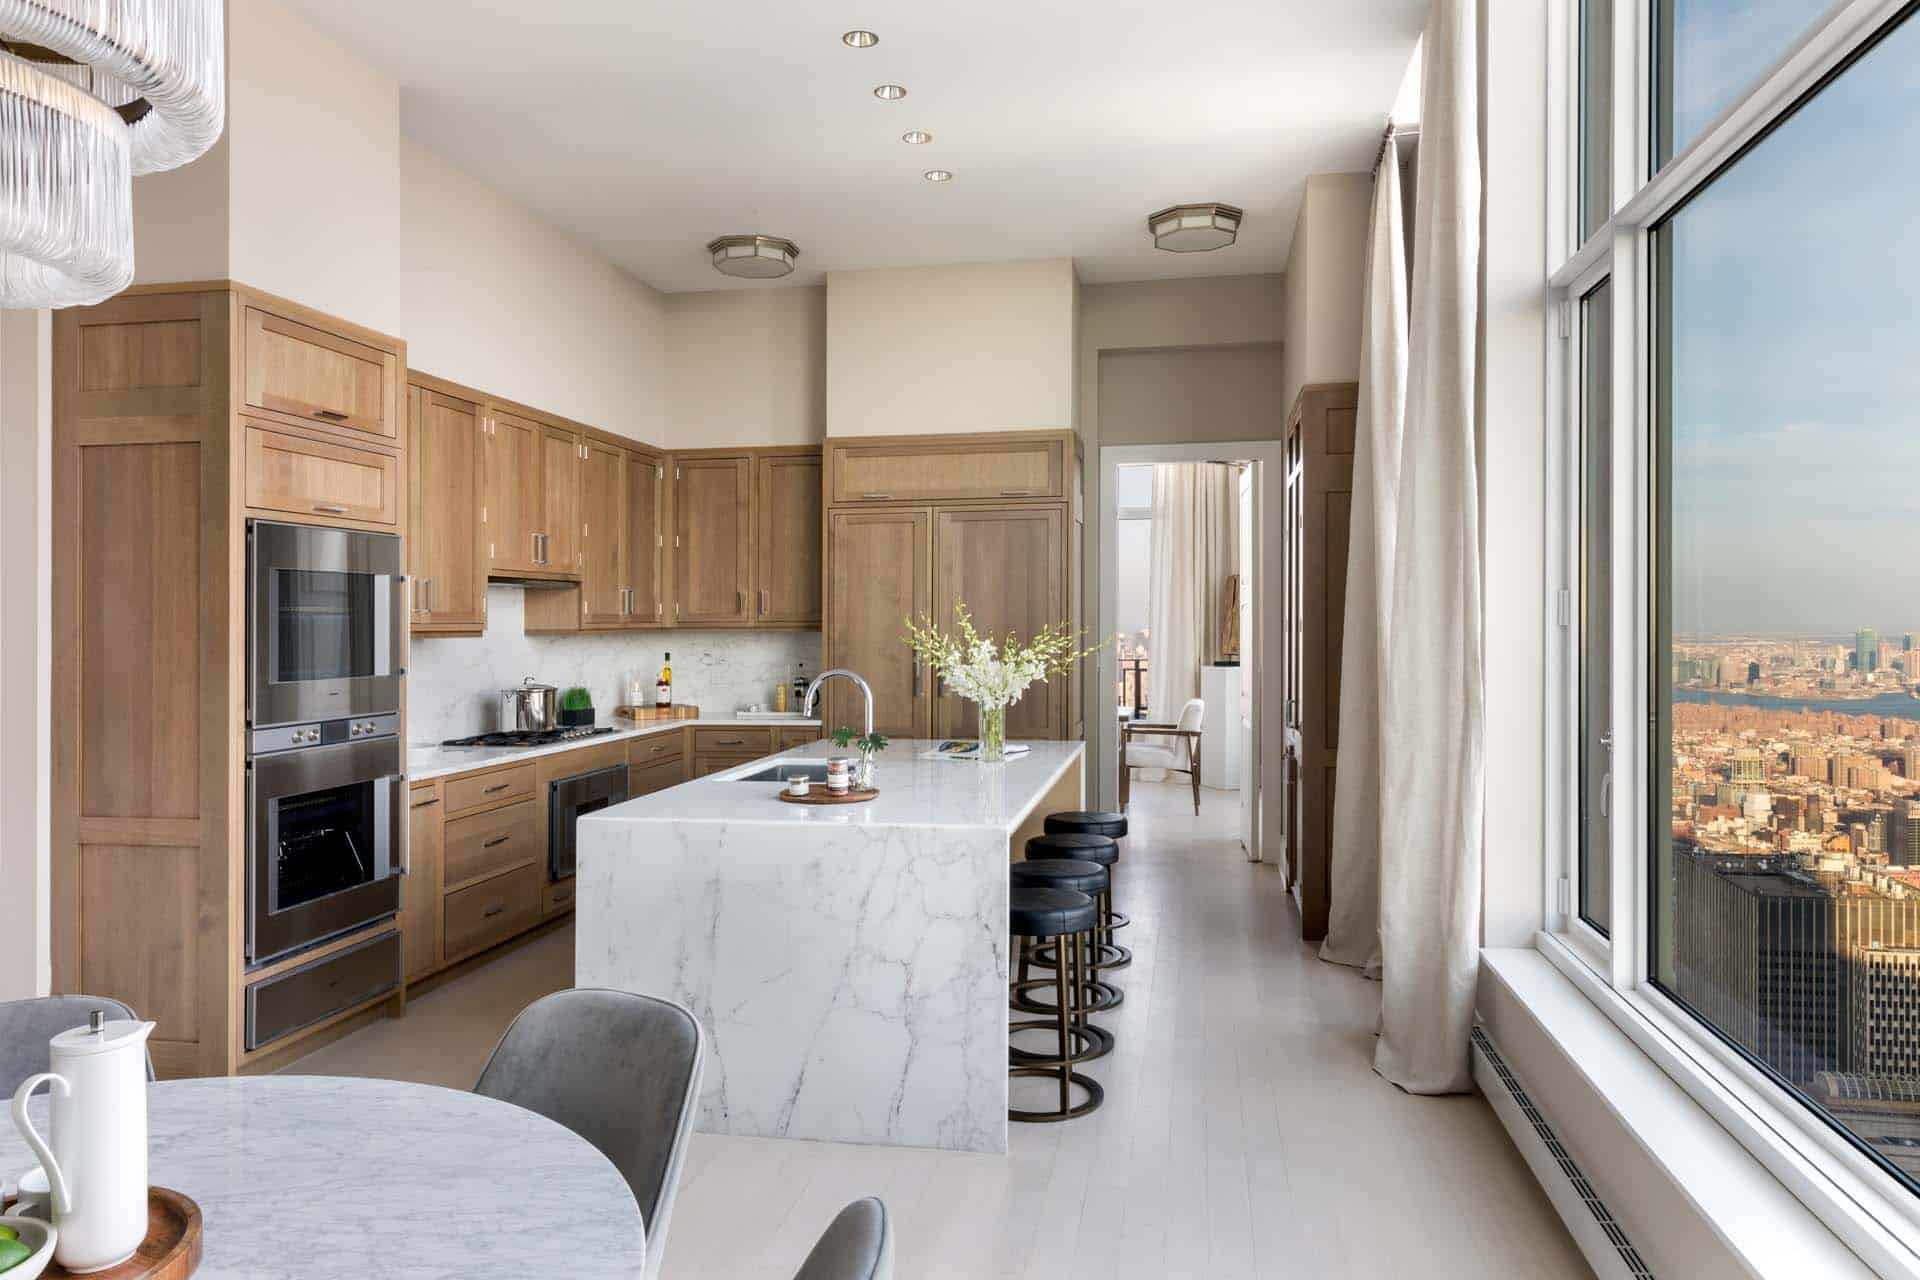 Luxury NYC condo kitchen features Bilotta Collection Cabinetry in rift cut white oak with a custom stain.